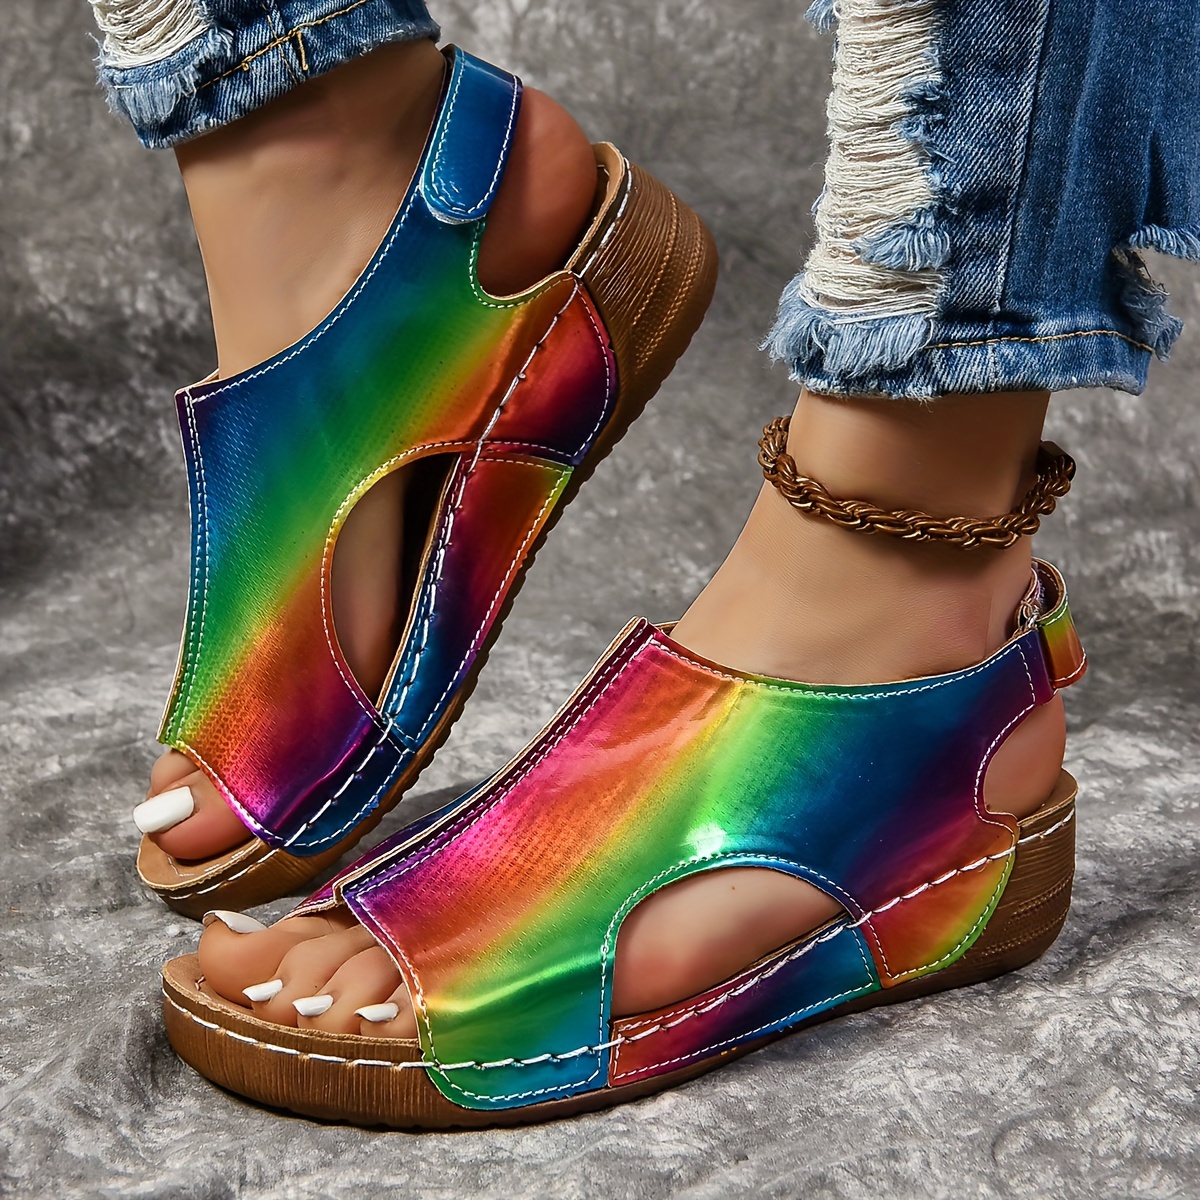 

Women's Rainbow Wedge Sandals, Fashion Peep Toe Cut-out Summer Shoes, Casual Outdoor Beach Sandals